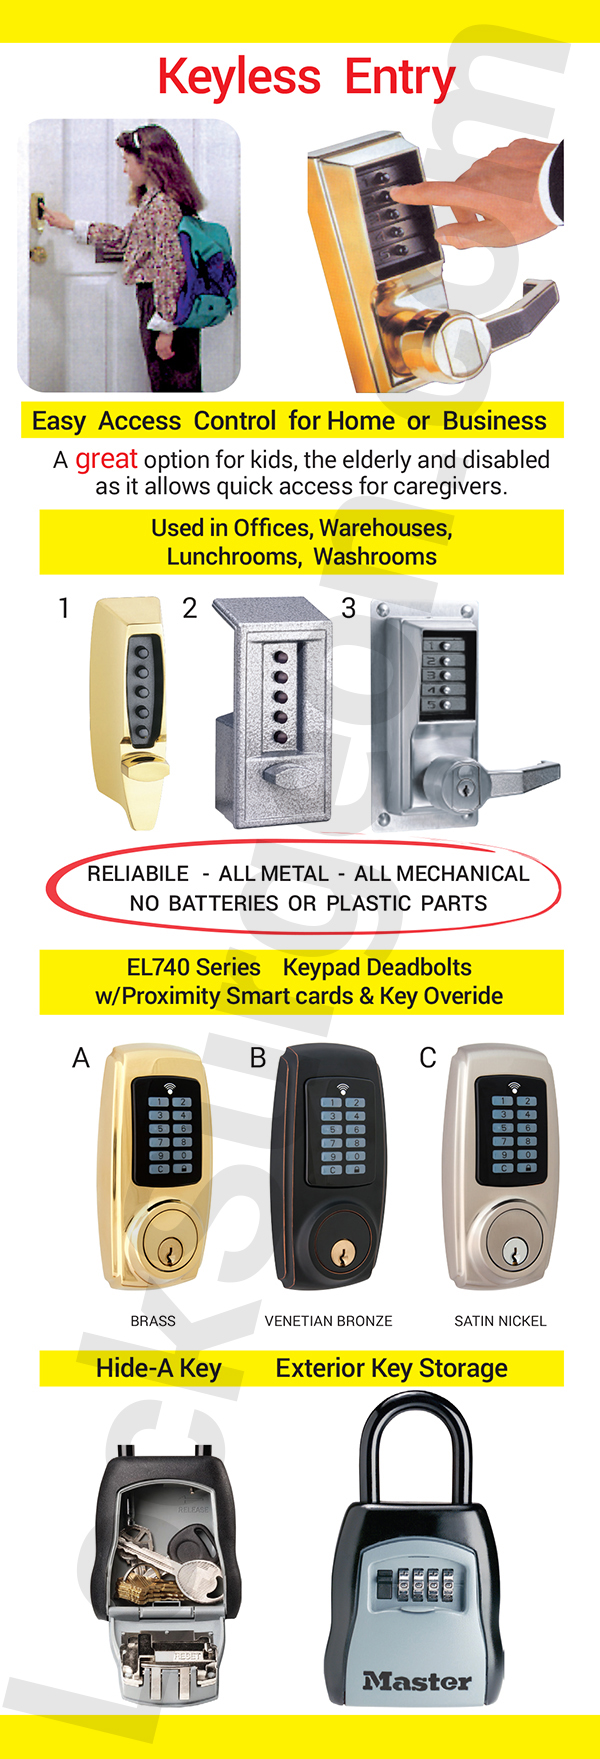 Lock Surgeon Edmonton keyless entry used in offices warehouses washrooms and residential homes.